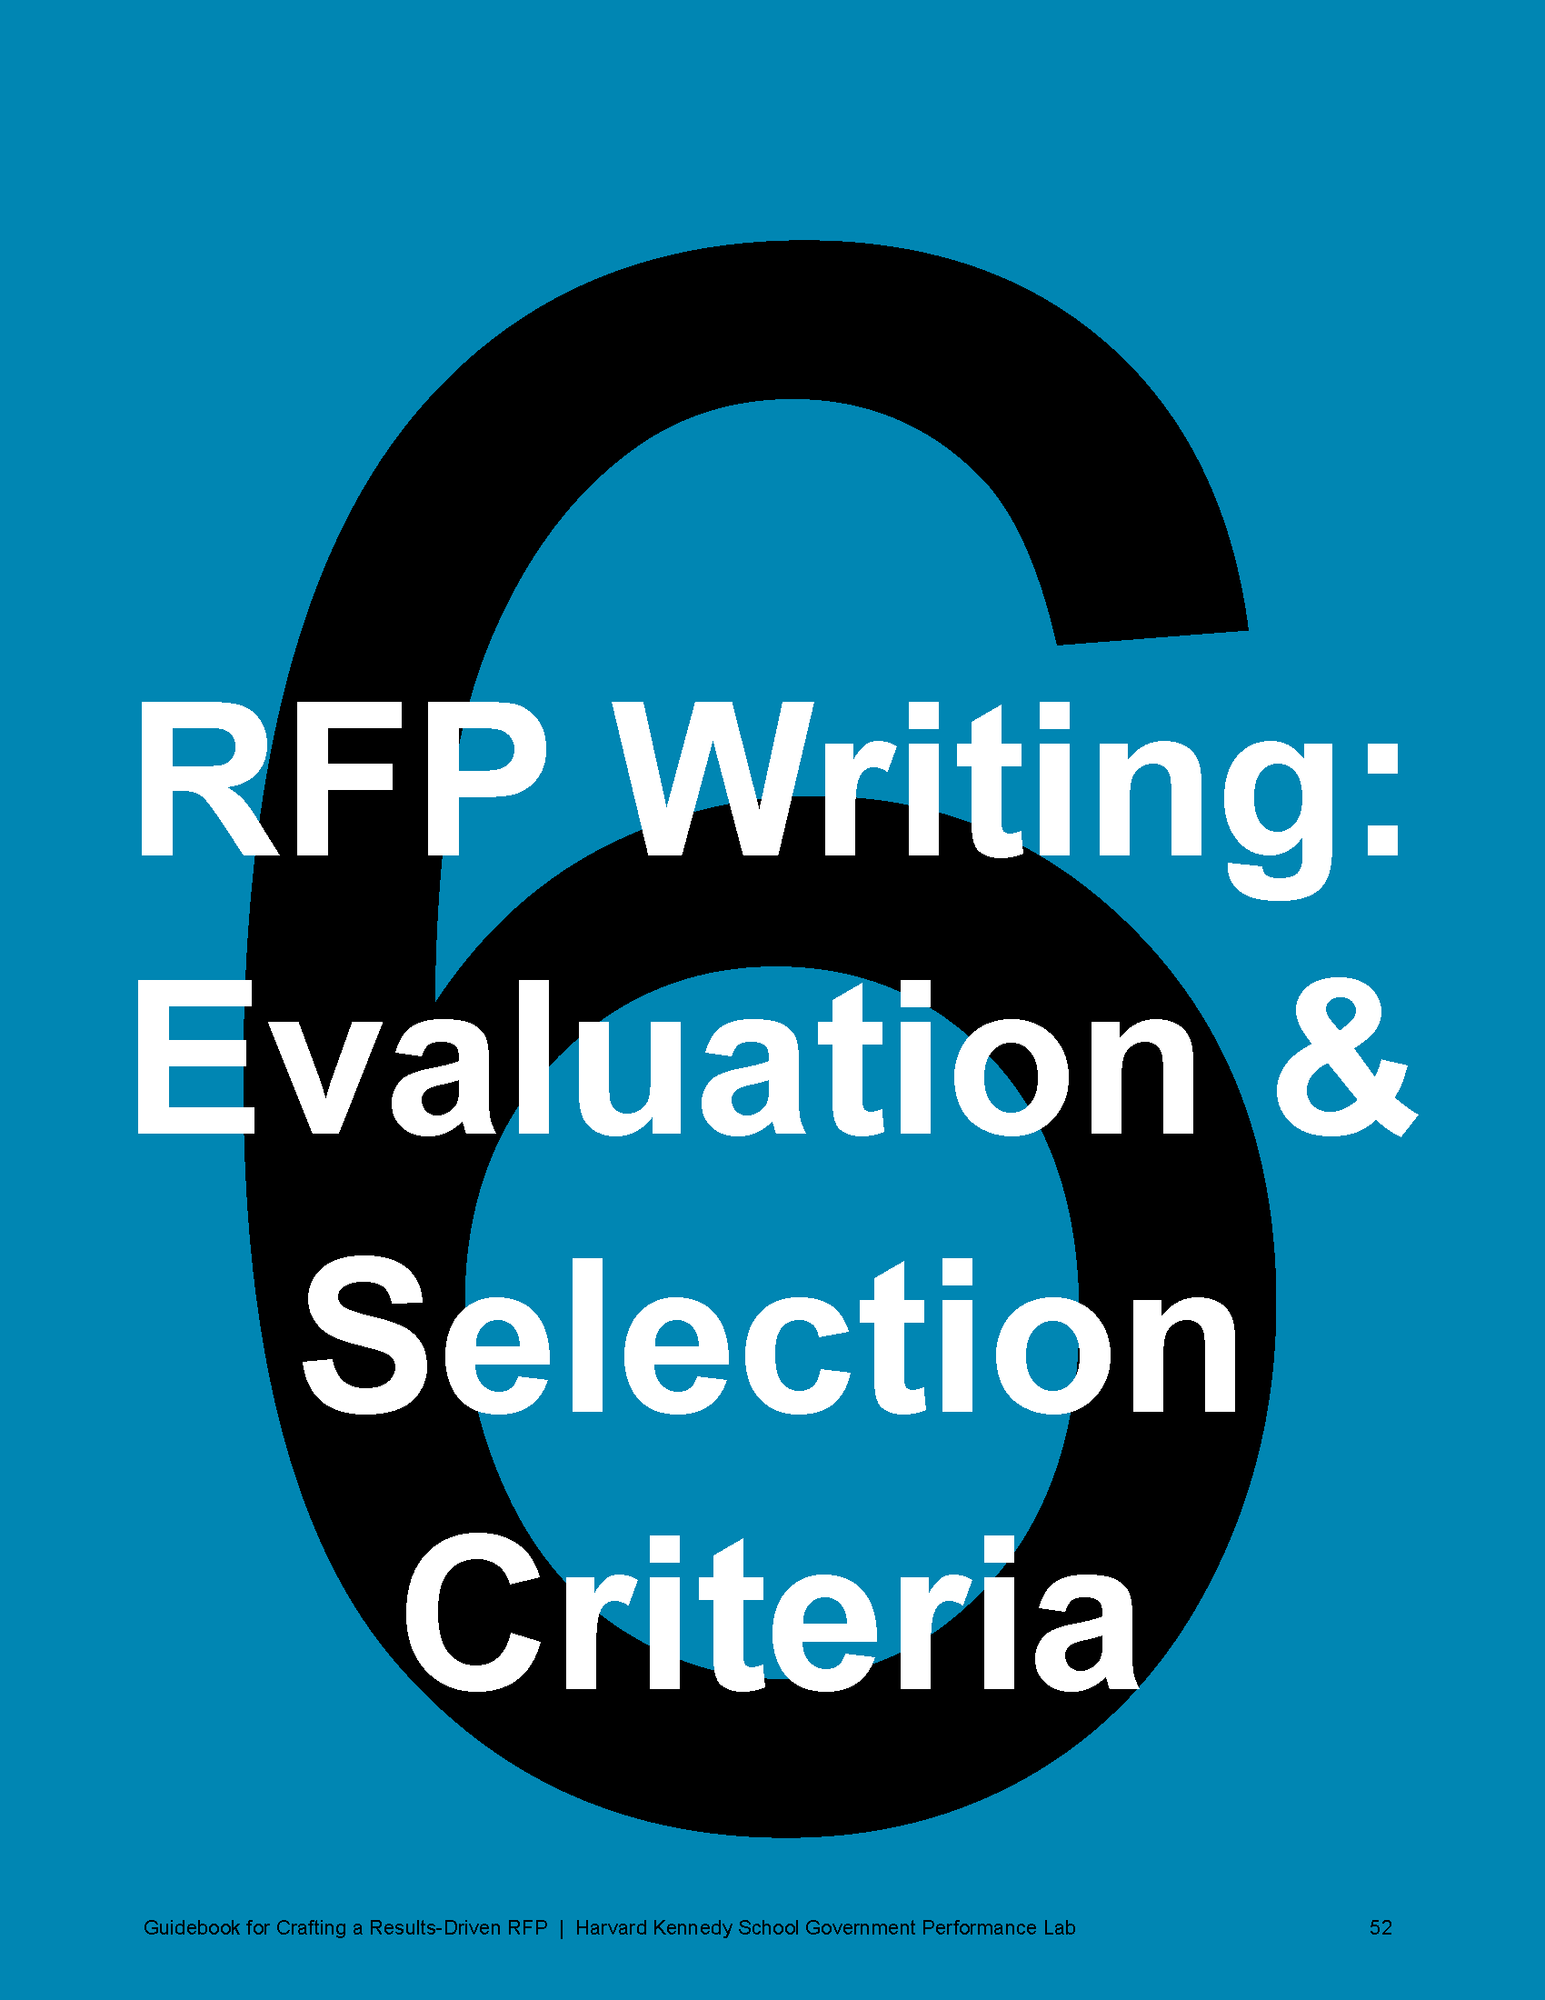 Evaluation and Selection Criteria